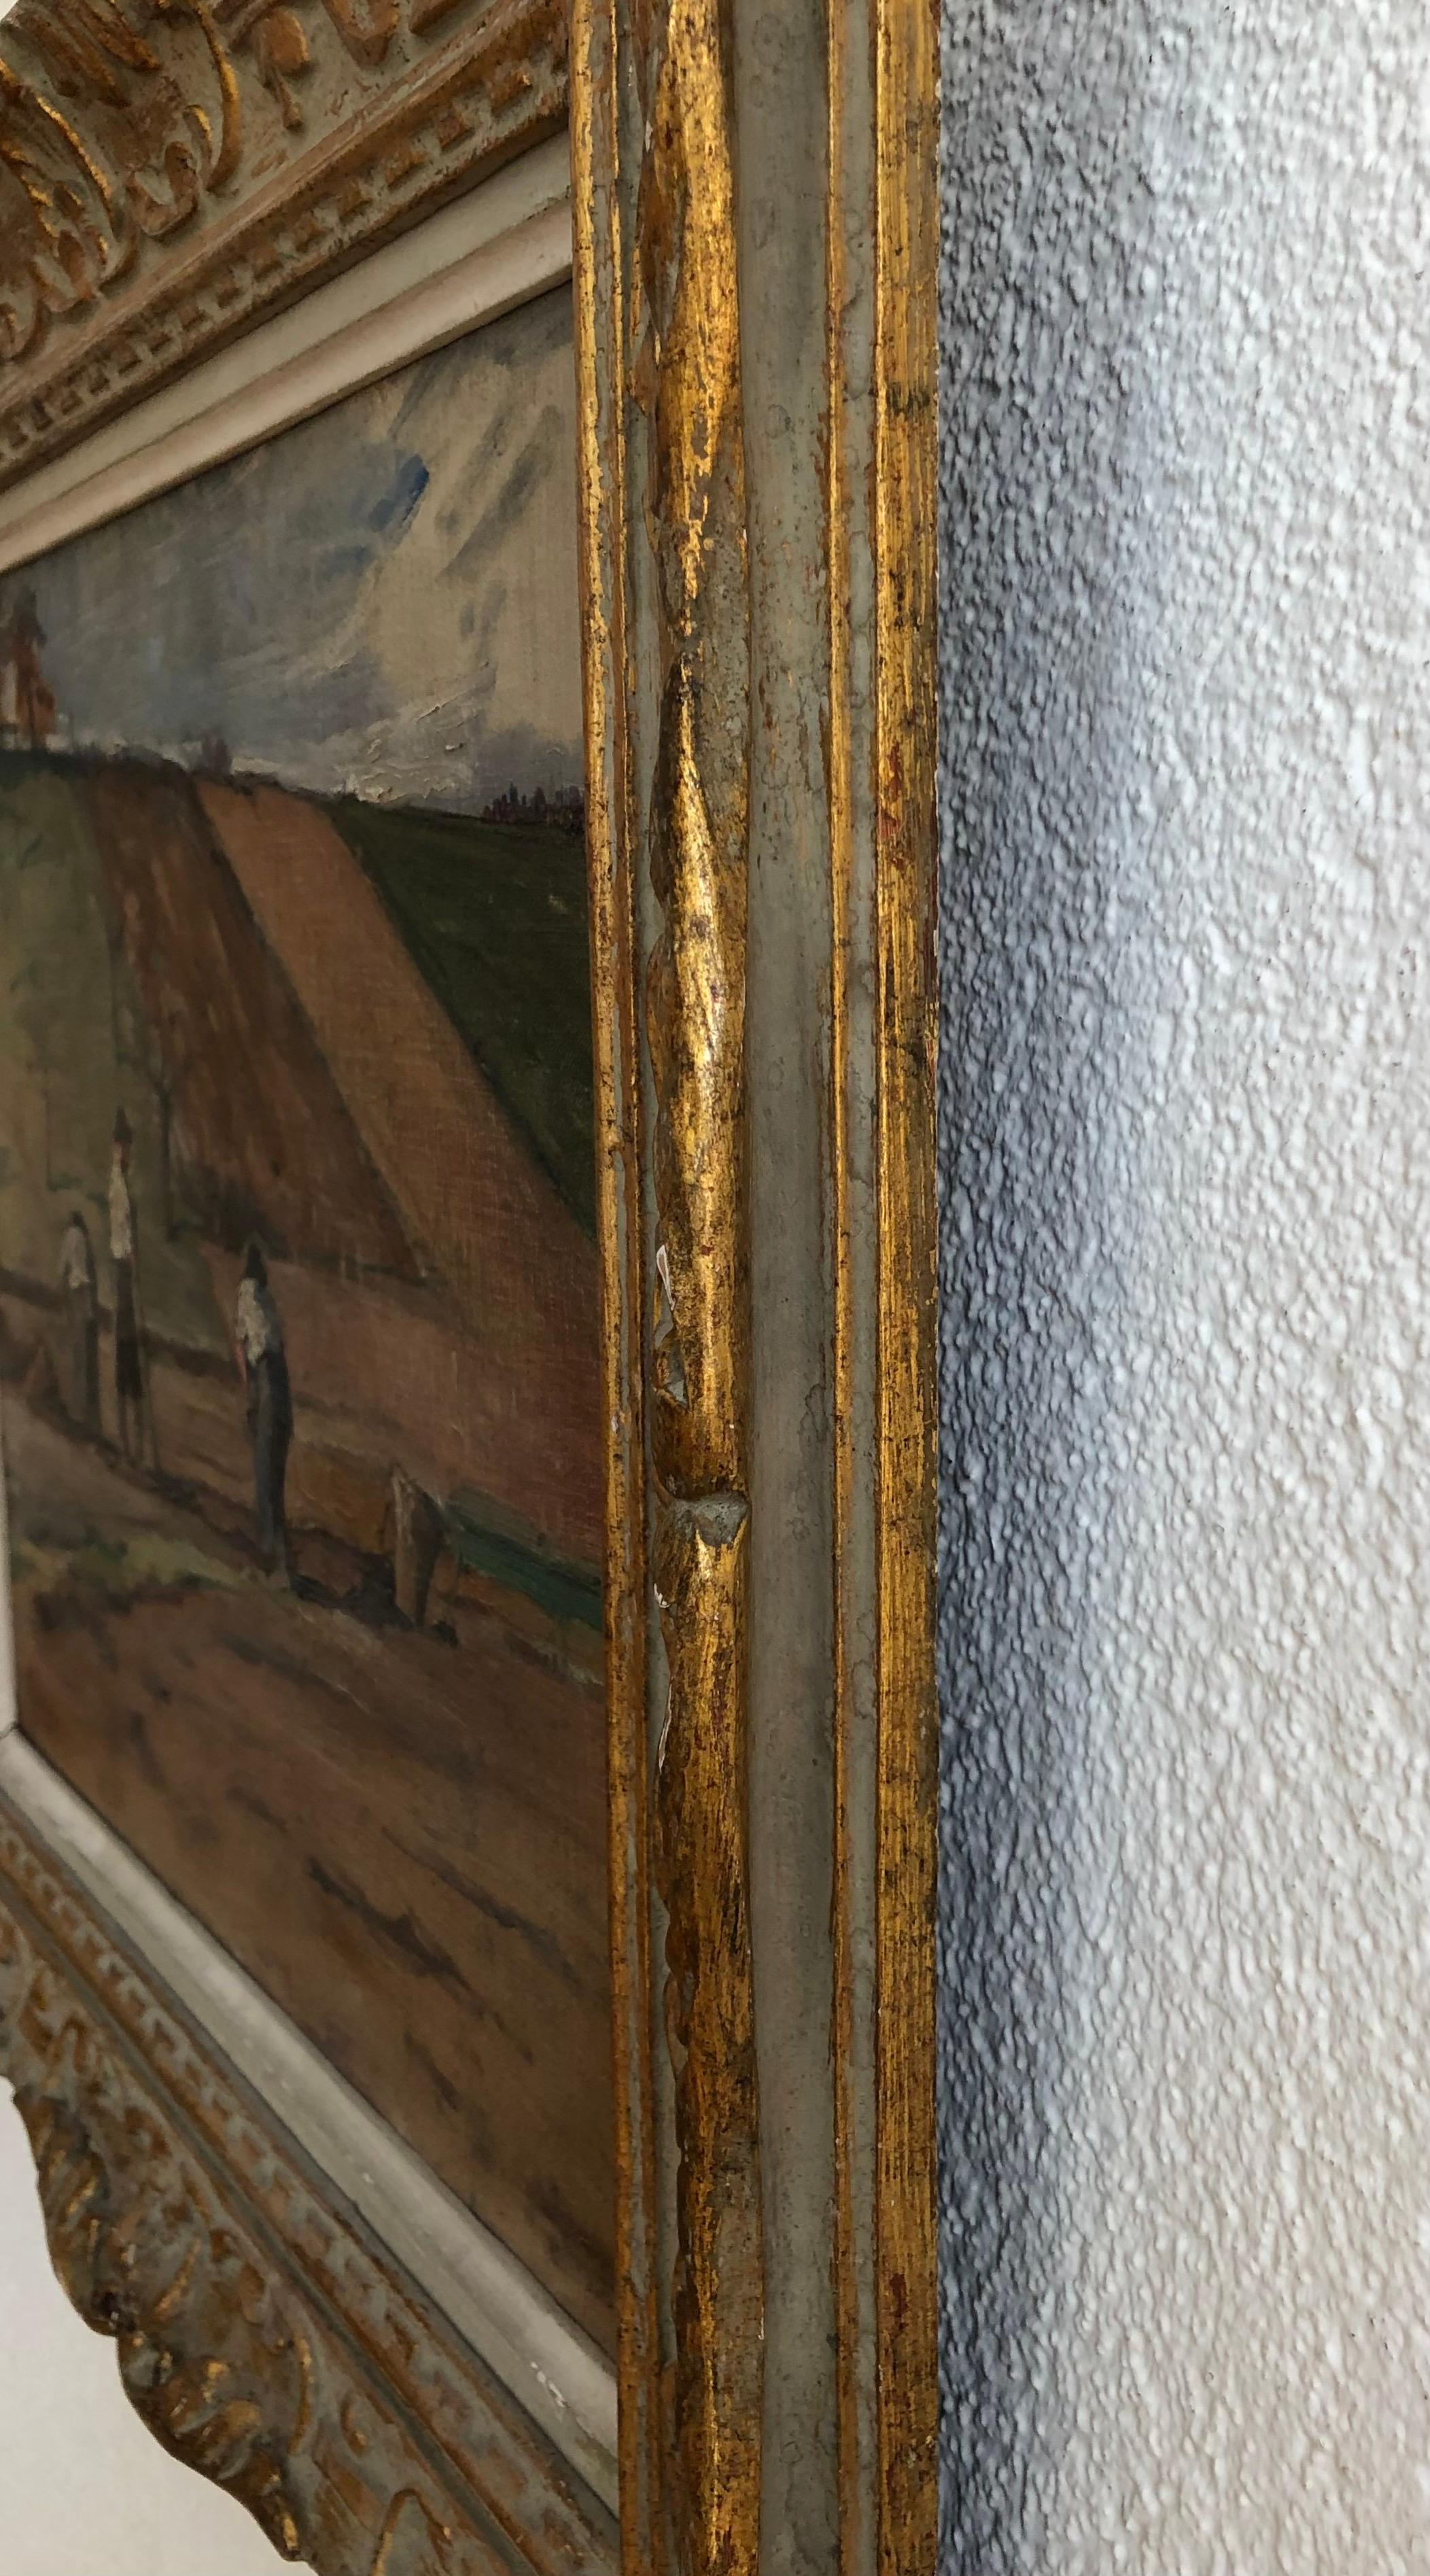 Work on canvas
Molded frame in plaster and gilded wood
55.5 x 63.5 x 4 cm